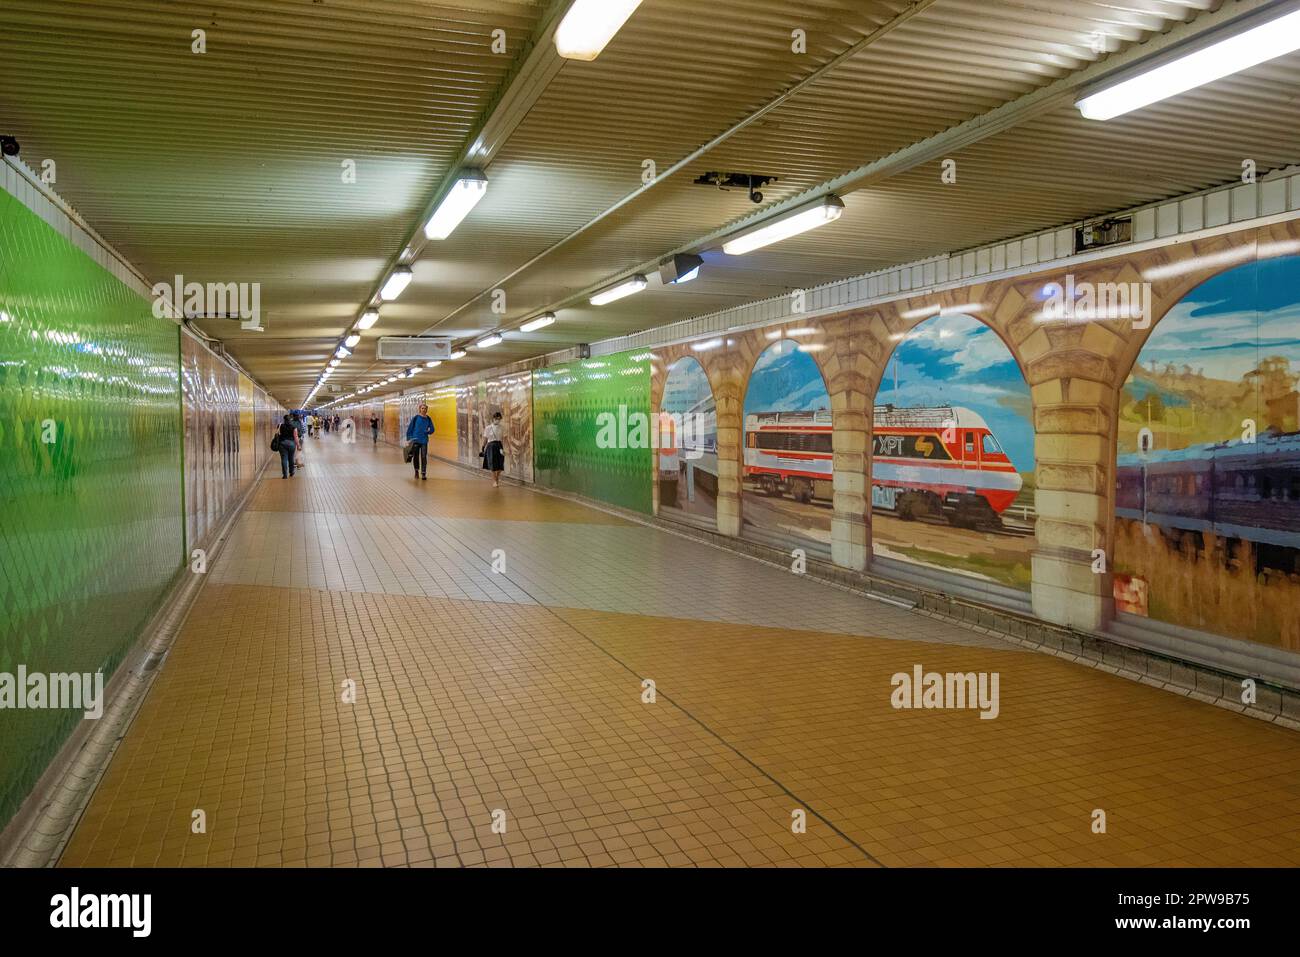 Weekend travelers walk past the murals and through the tiled Devonshire Street Tunnel at Sydney's Central Station in New South Wales, Australia Stock Photo